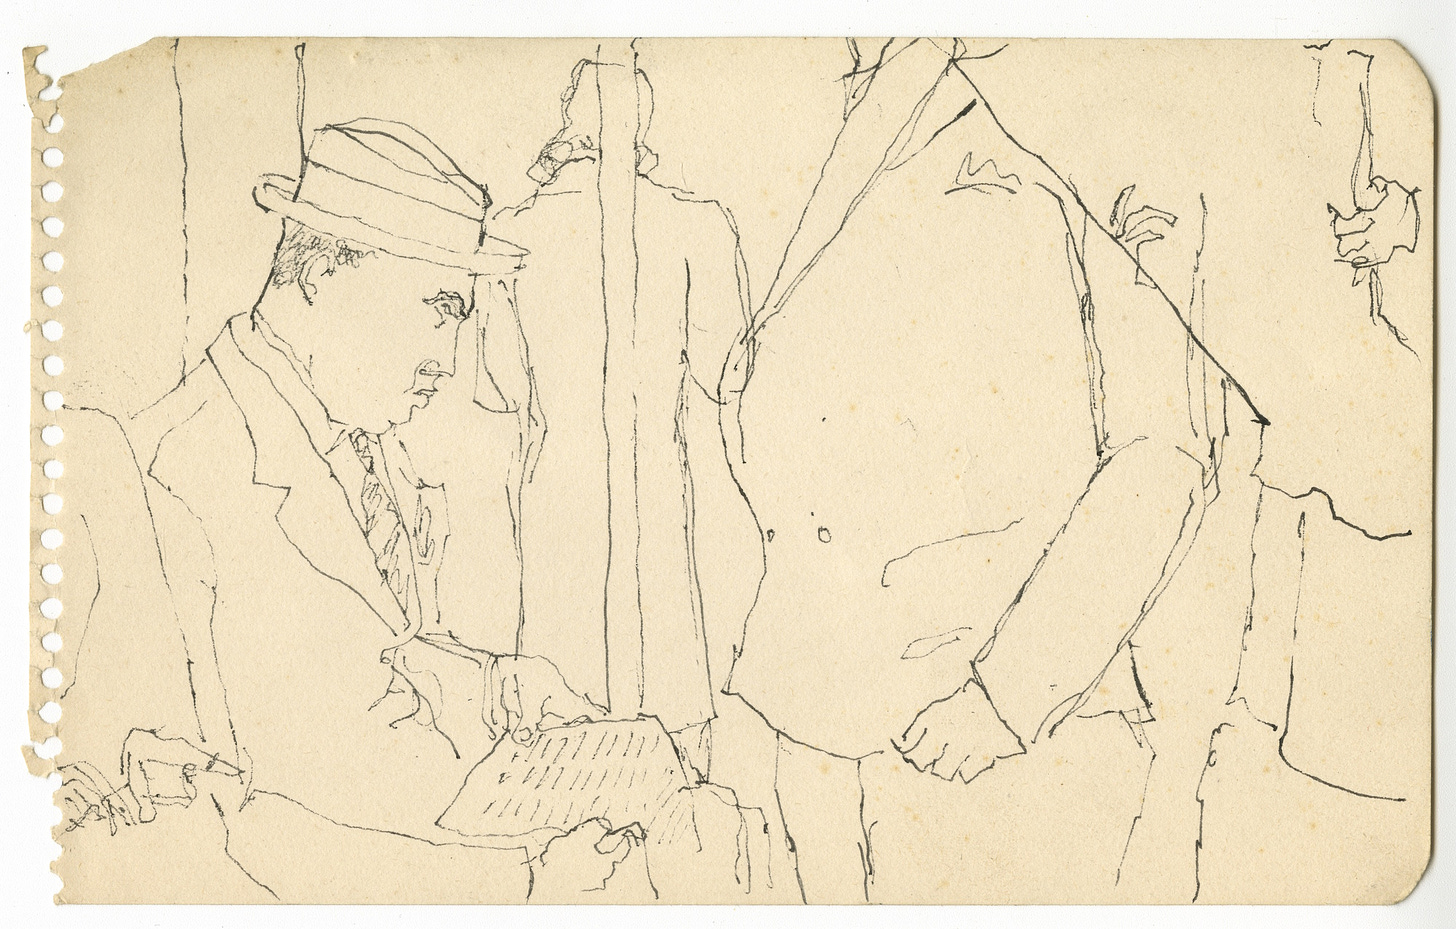 The Paris Review - Underground in the 1940s: Alex Katz's Subway Drawings